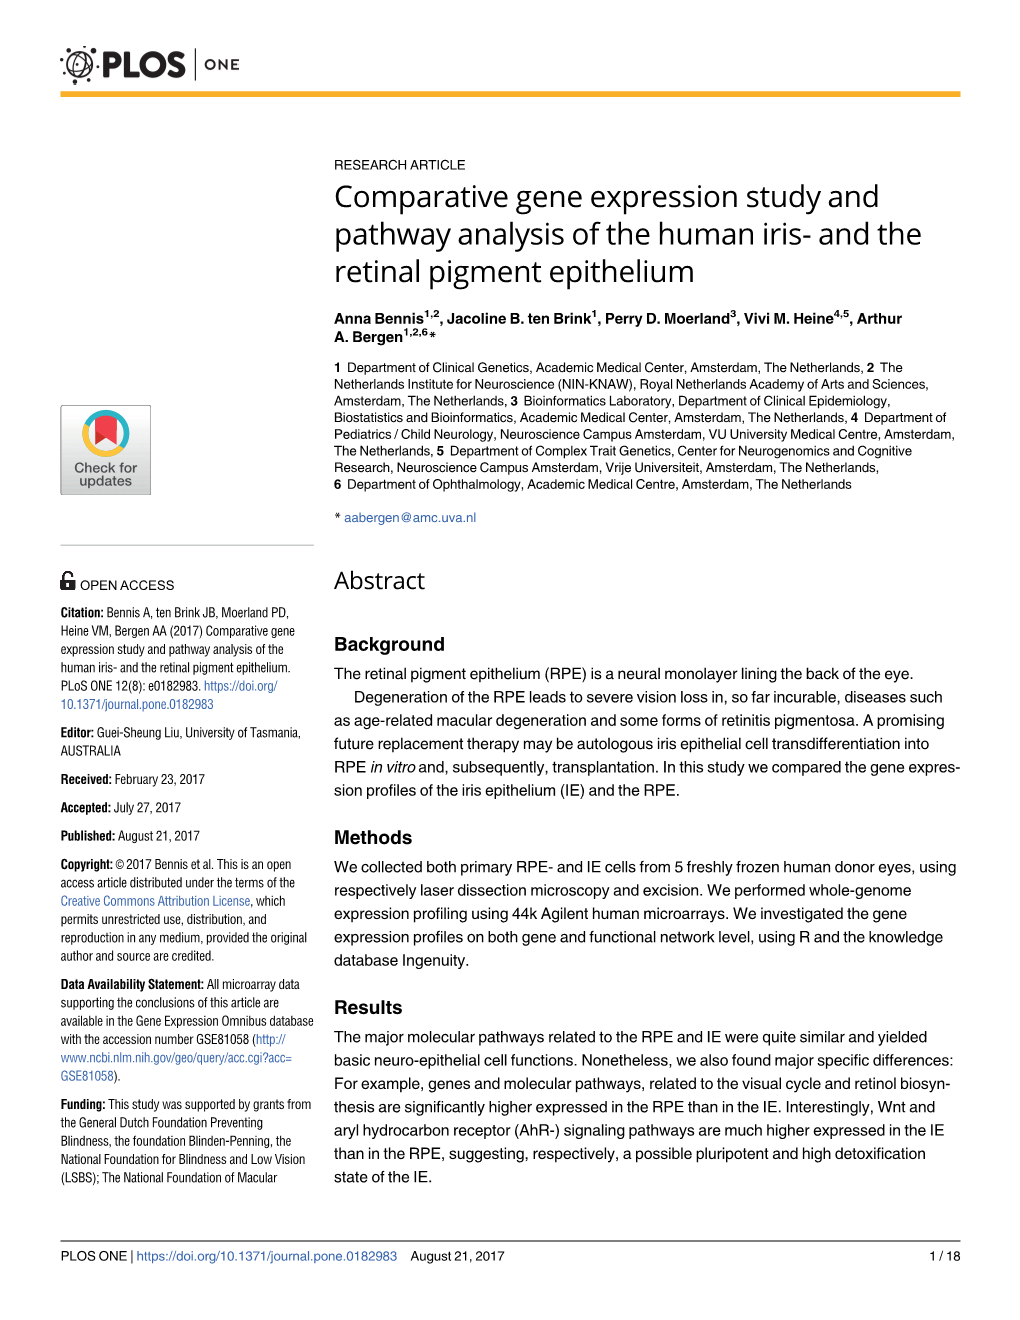 Comparative Gene Expression Study and Pathway Analysis of the Human Iris- and the Retinal Pigment Epithelium